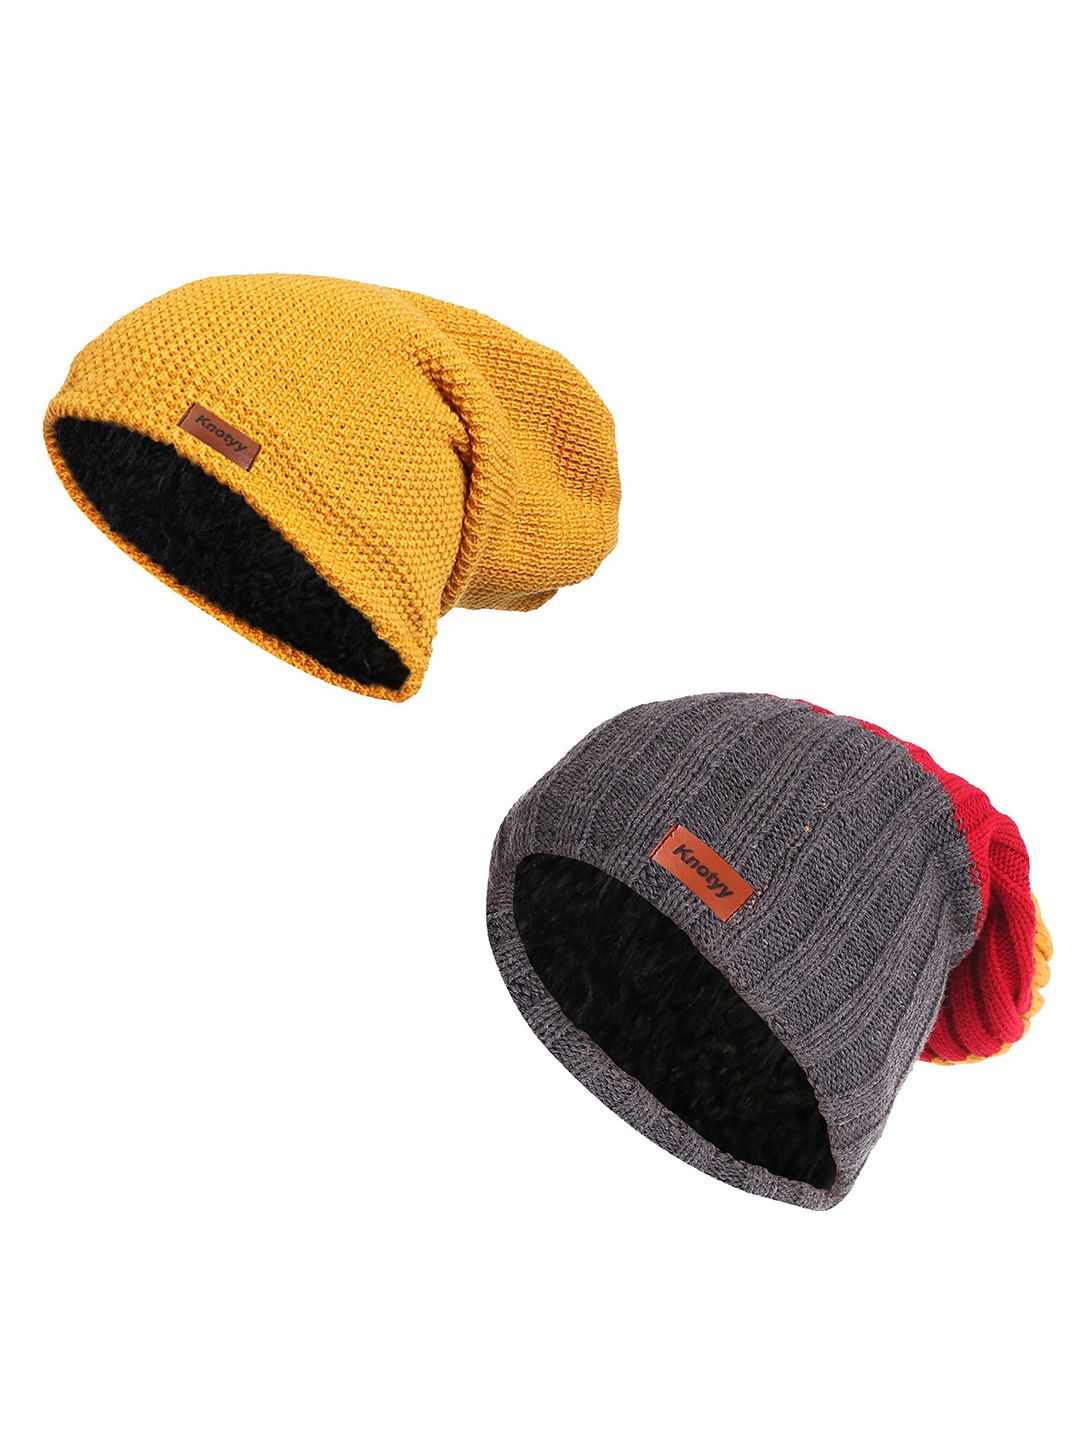 Knotyy Unisex Pack Of 2 Yellow & Grey Beanie Price in India